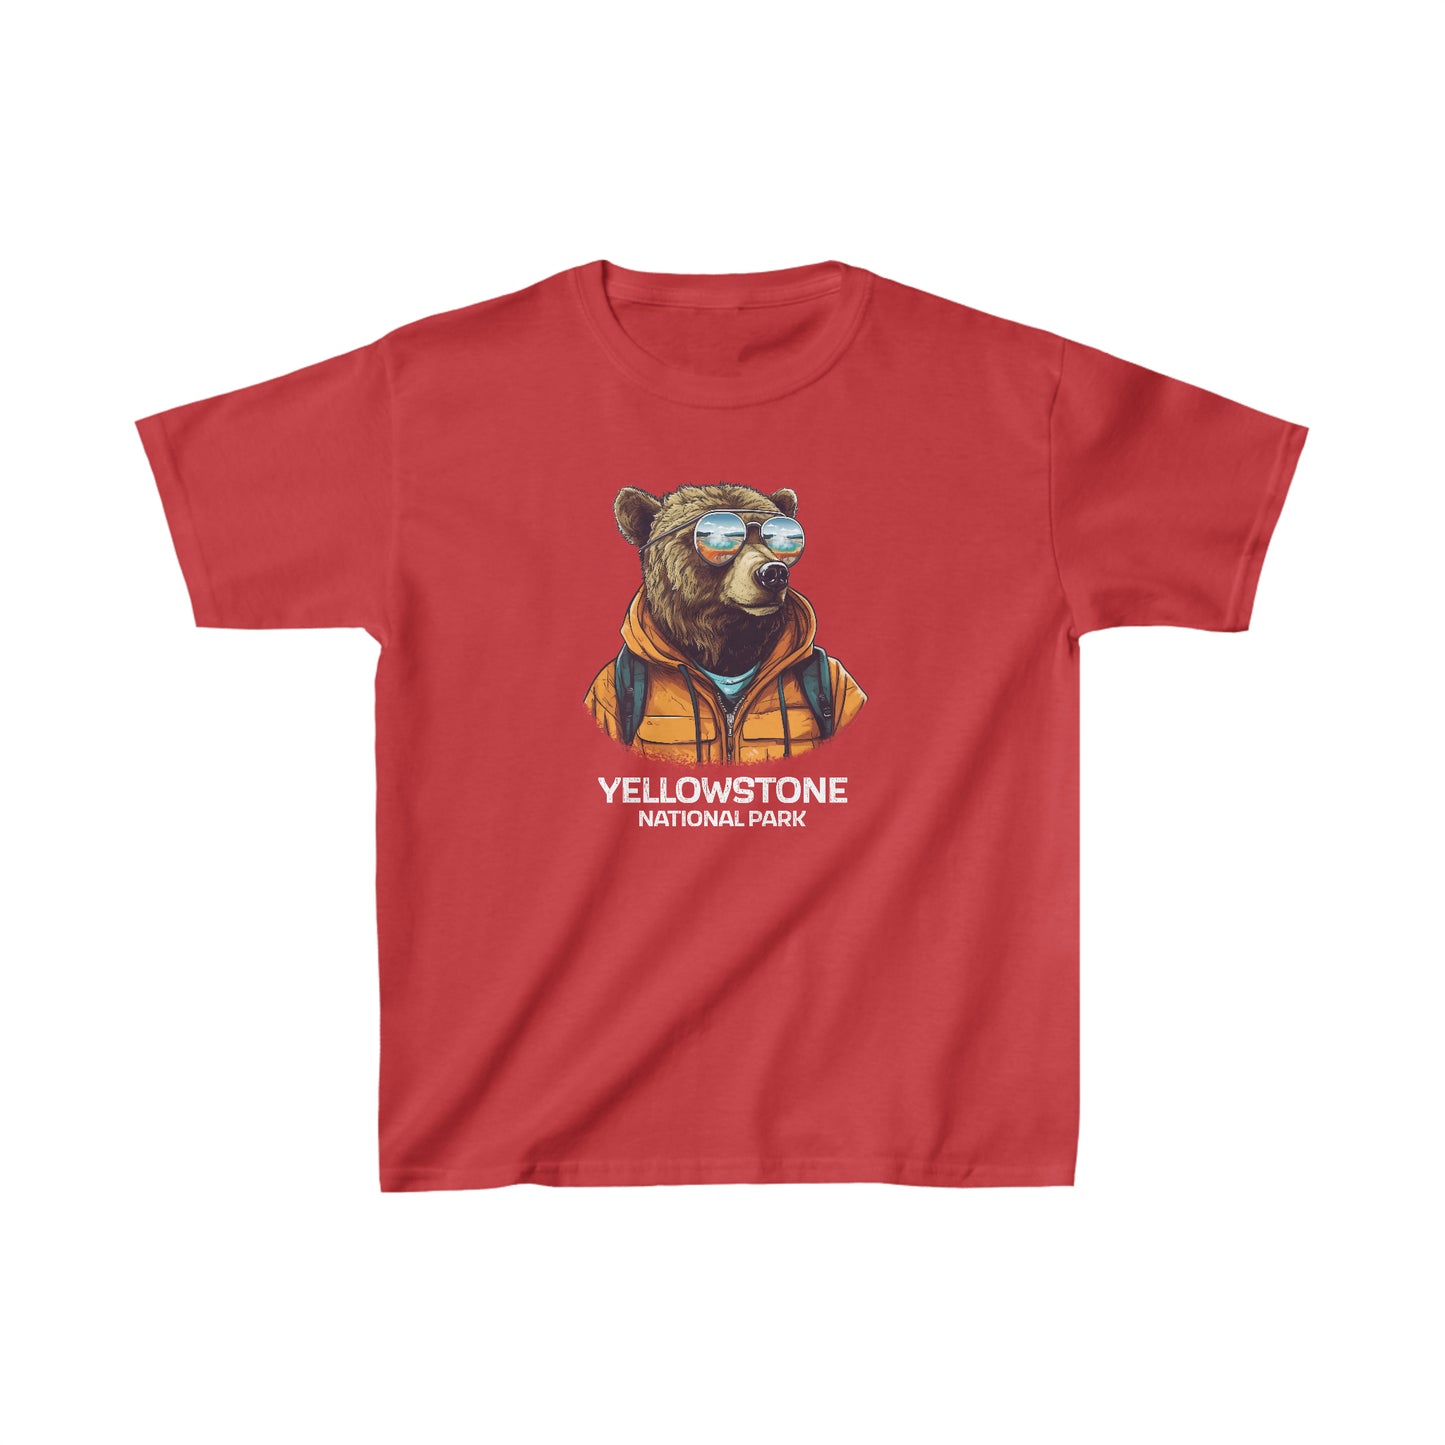 Yellowstone National Park Child T-Shirt - Cool Grizzly Bear